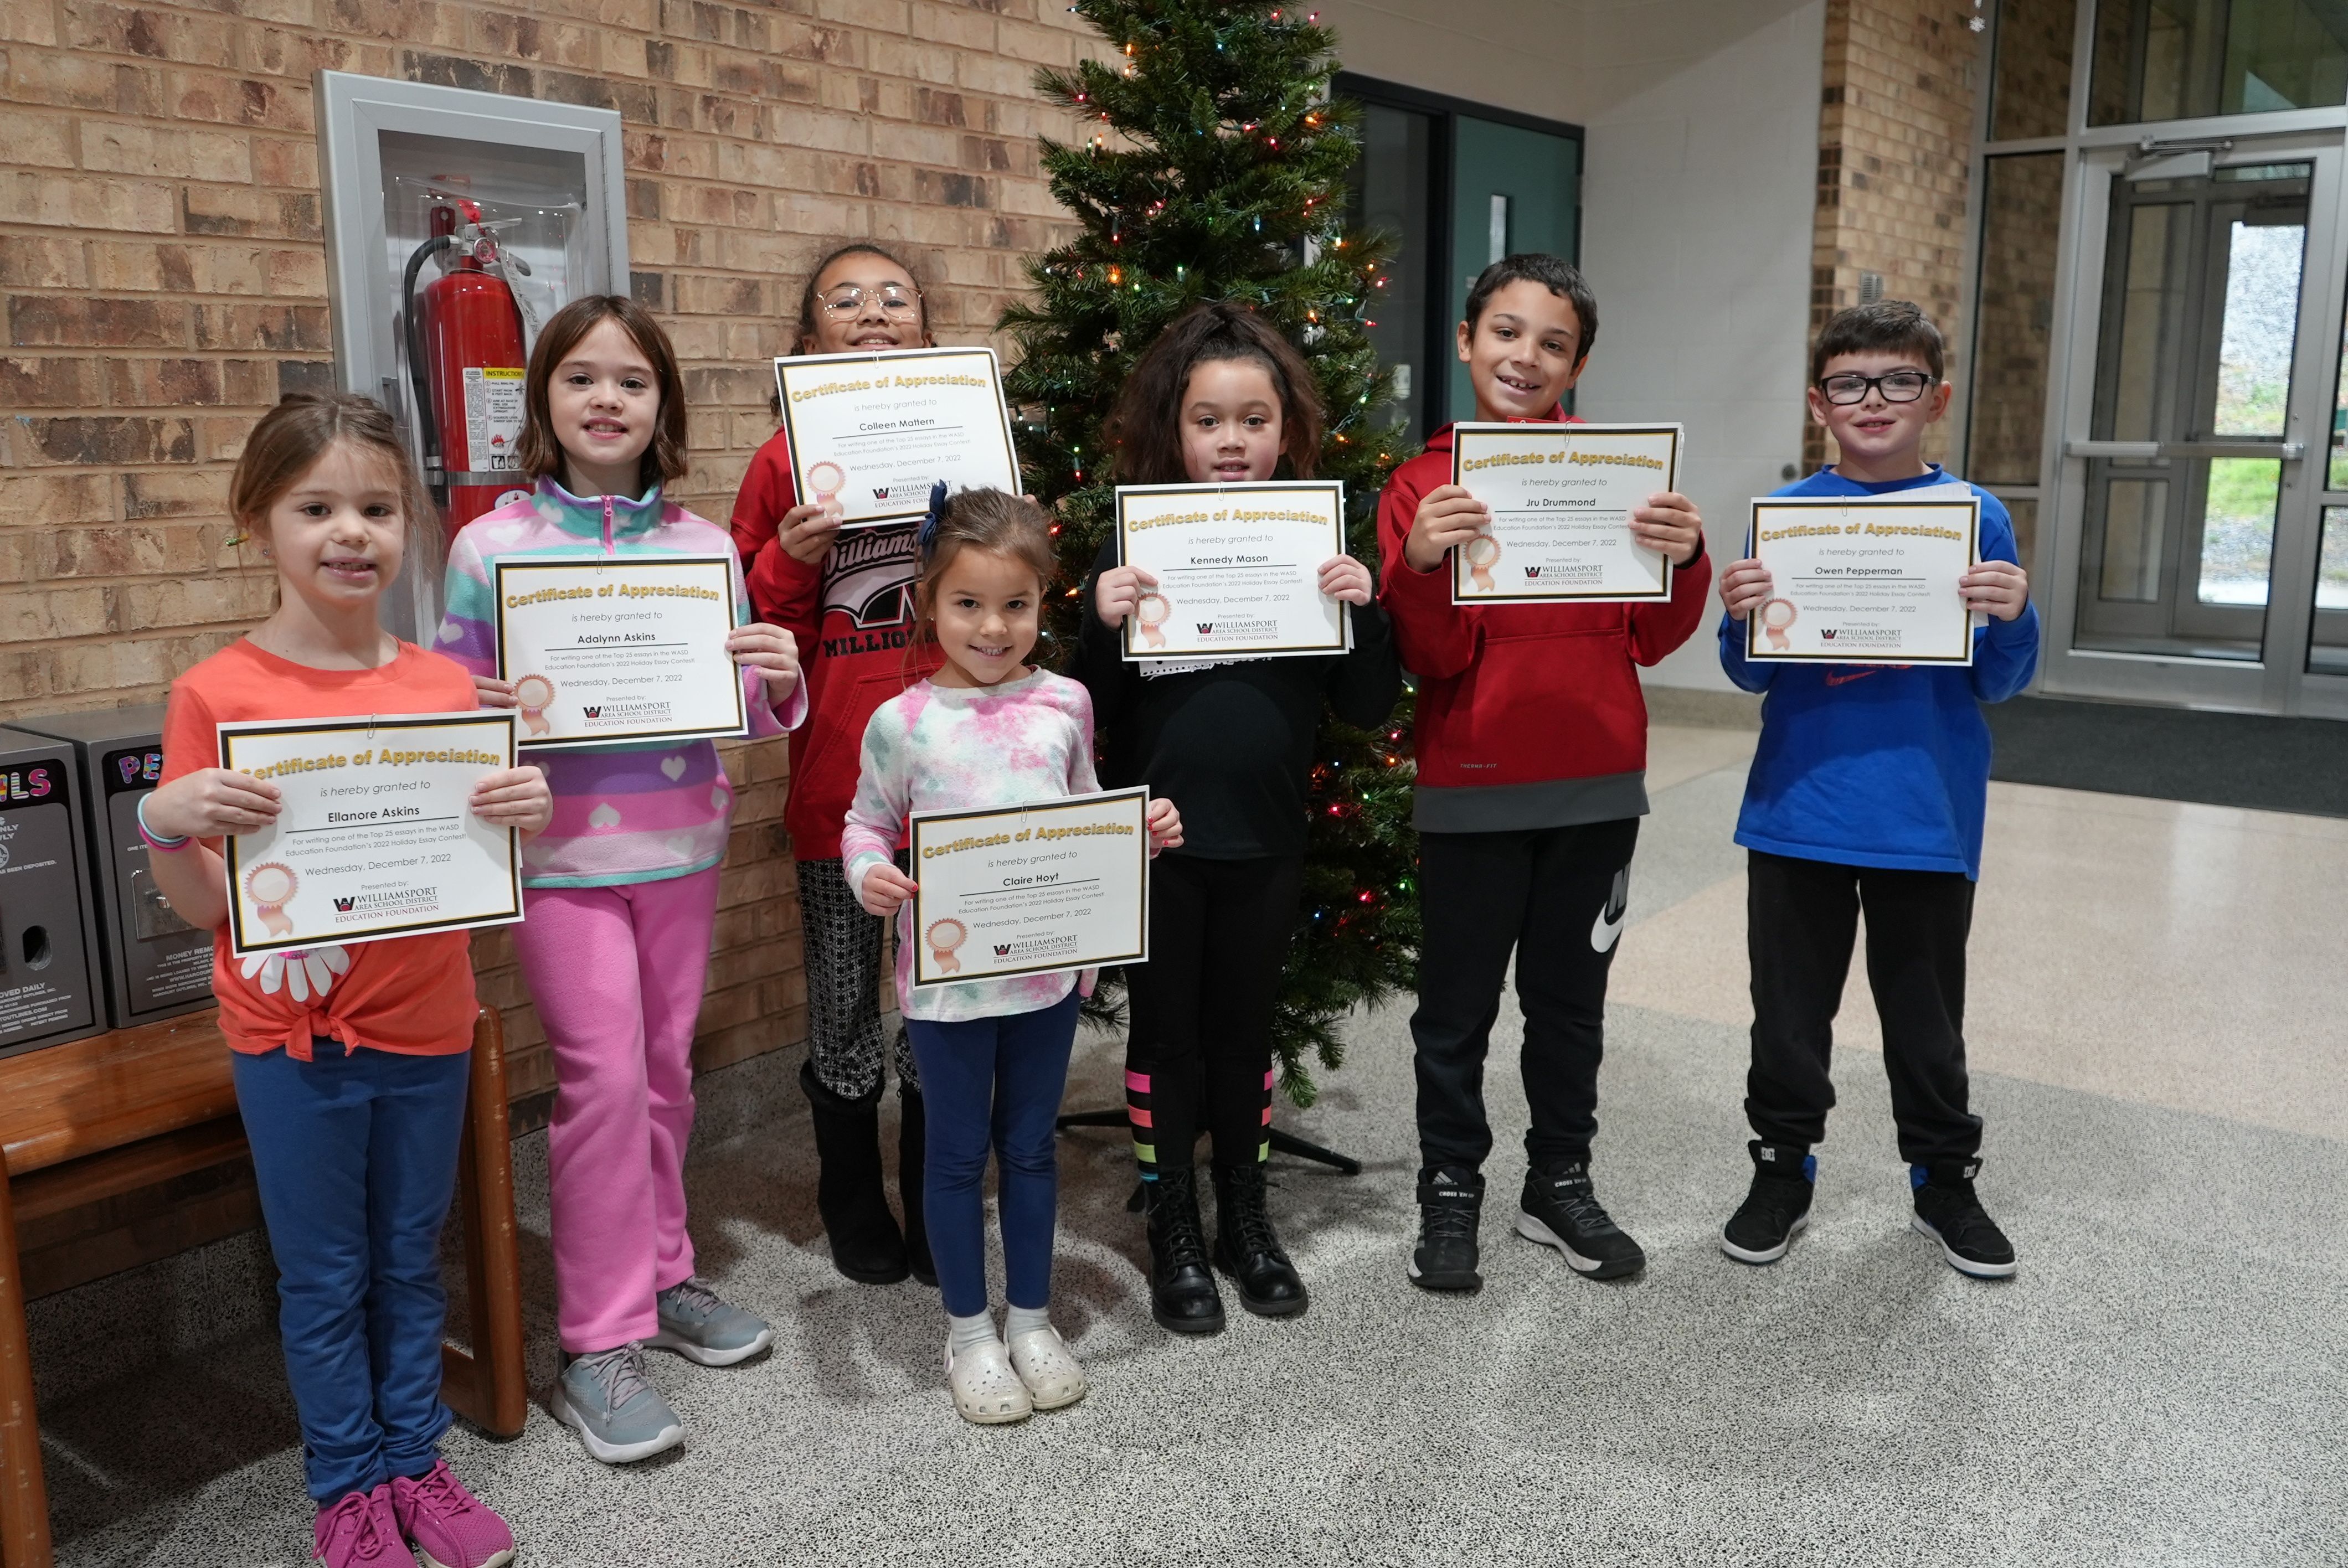 25 Winners Selected in WASDEF Holiday Essay Contest